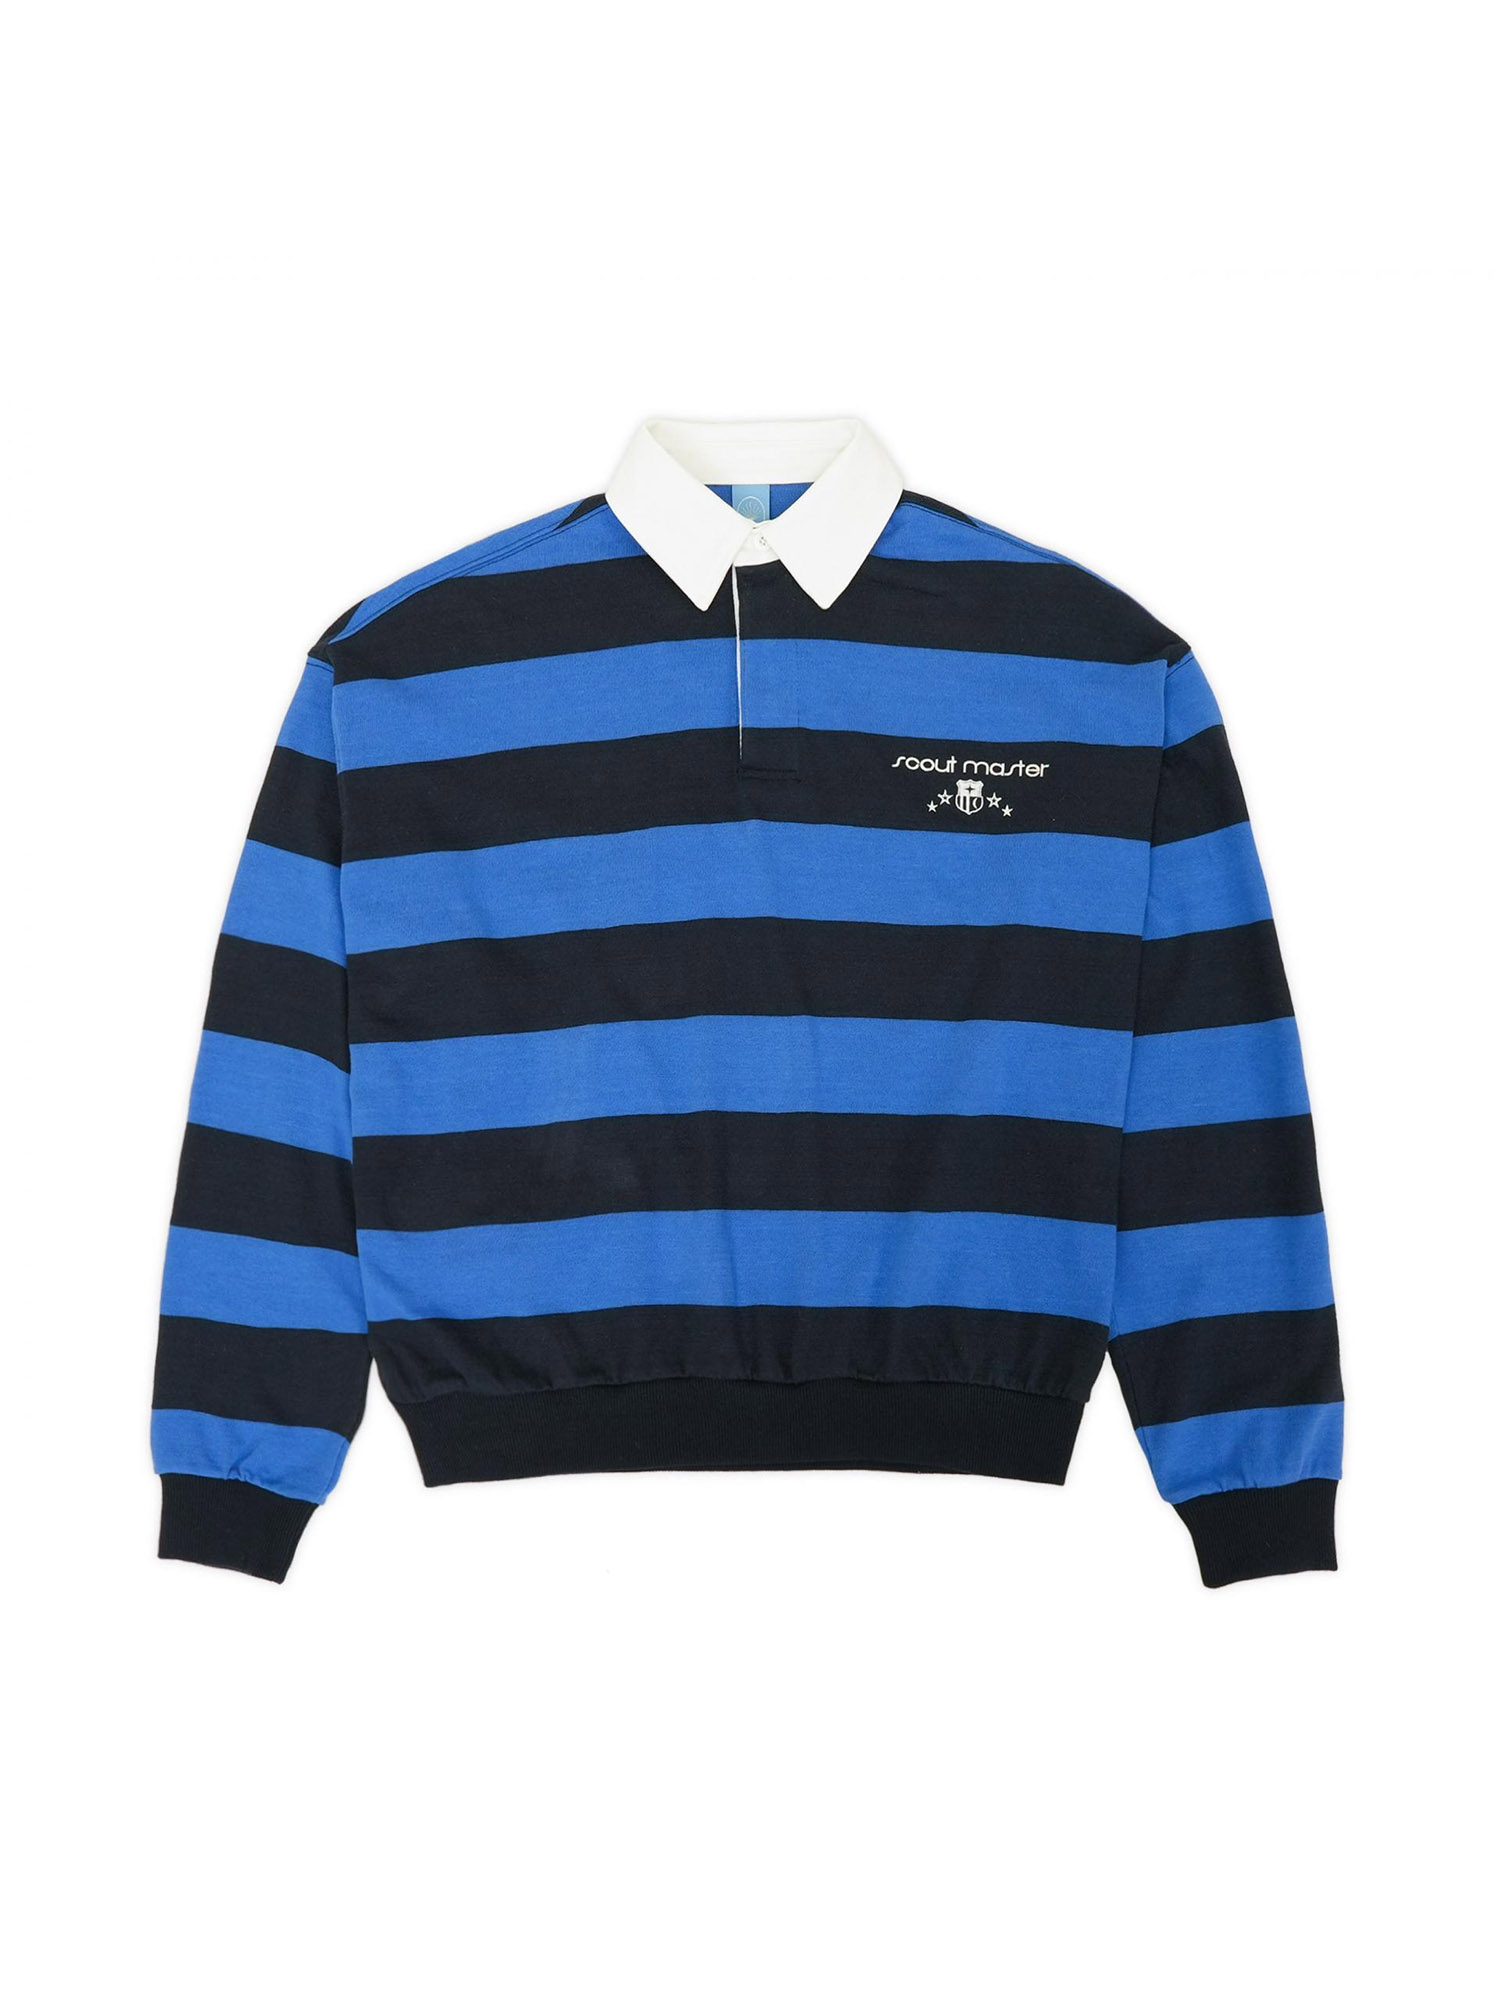 Scout Master Rugby shirt - Blue Navy